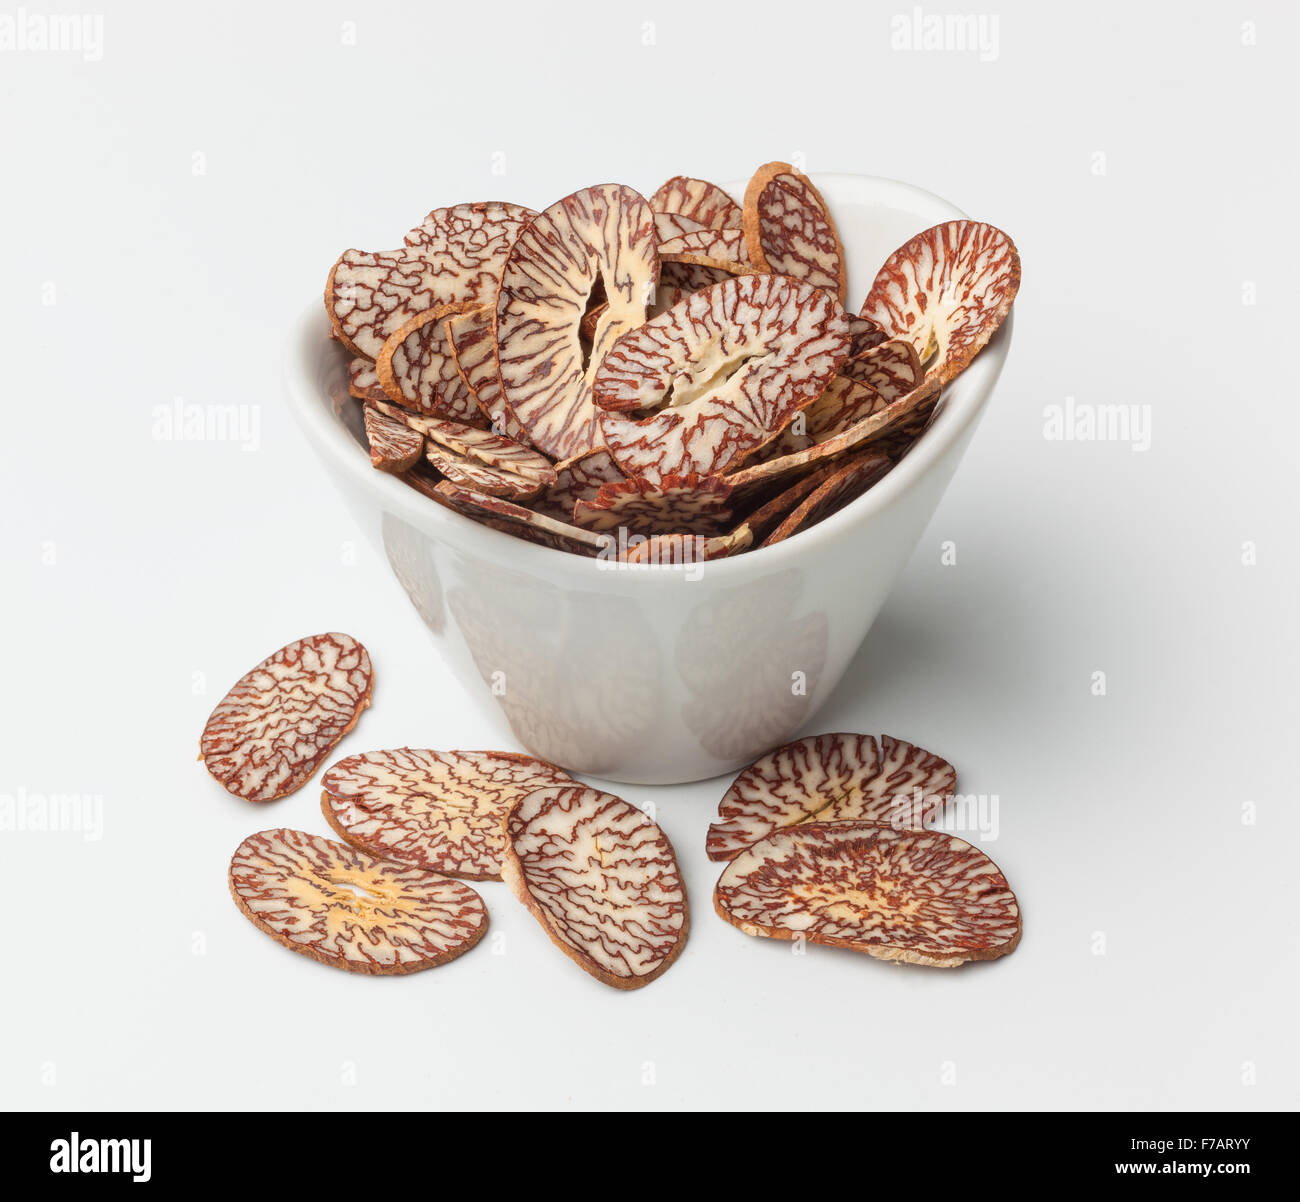 https://c8.alamy.com/comp/F7ARYY/betel-nut-chips-in-a-bowl-isolated-on-white-F7ARYY.jpg